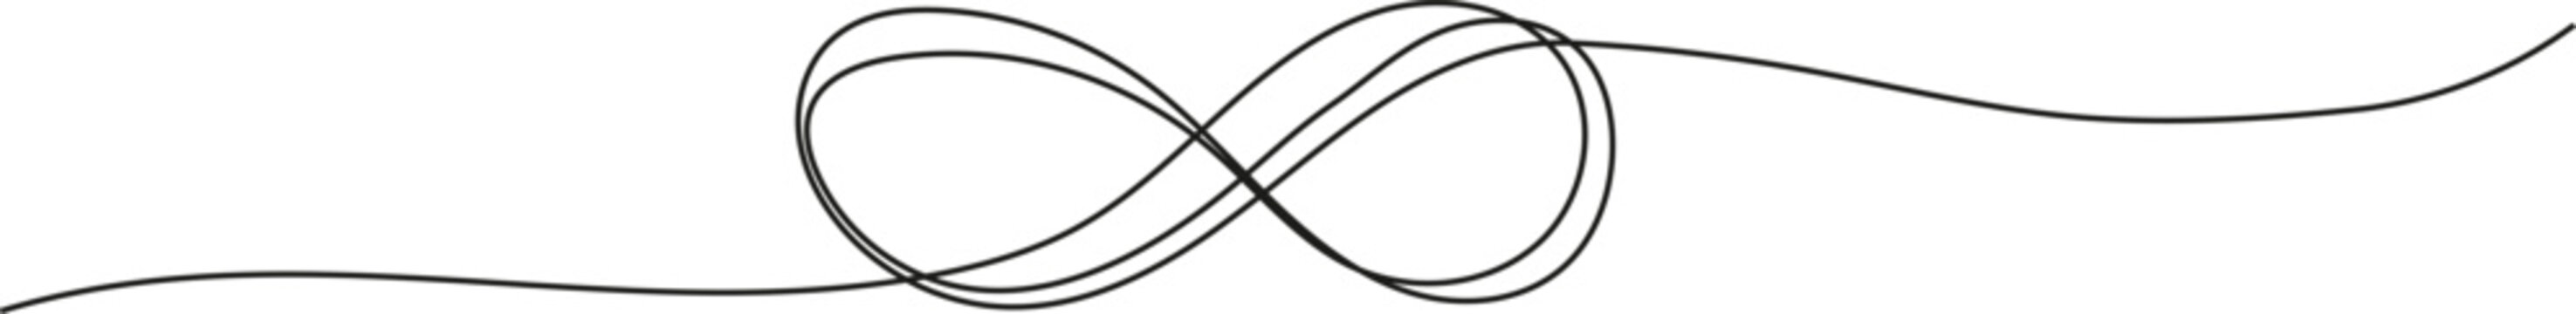 Infinity continuous line vector. Infinity eternity symbol in variations set design.